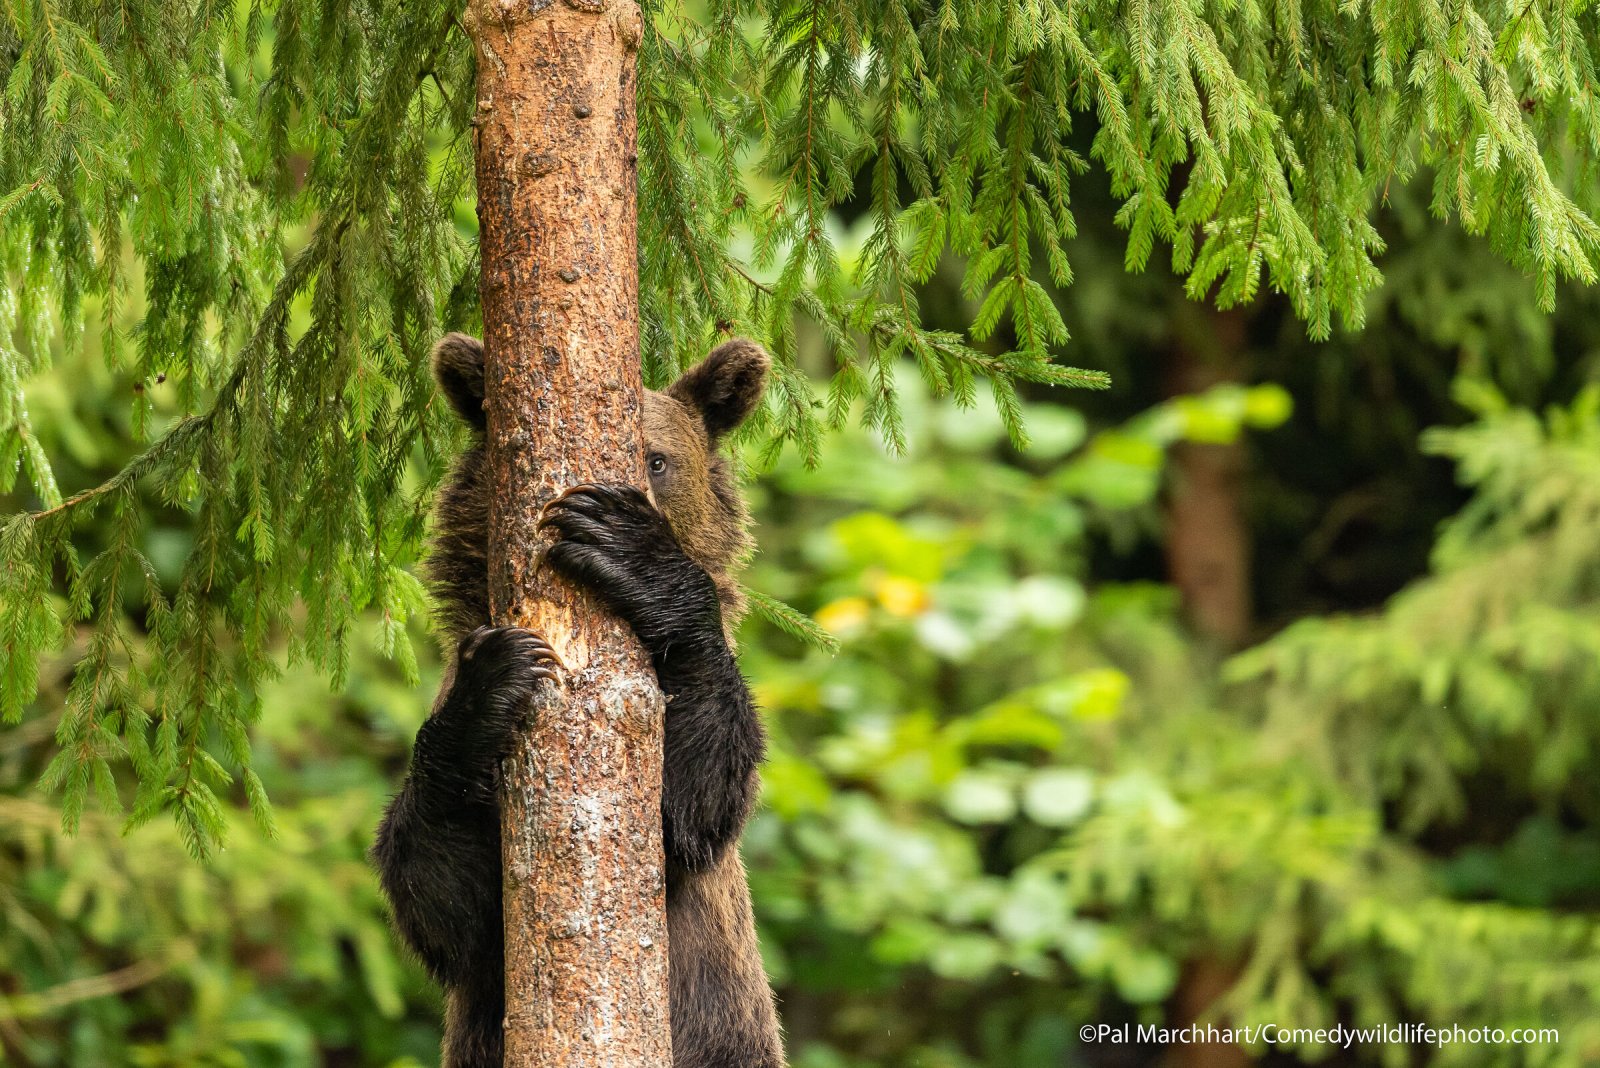 A brown bear appears to peek out from behind a tree.